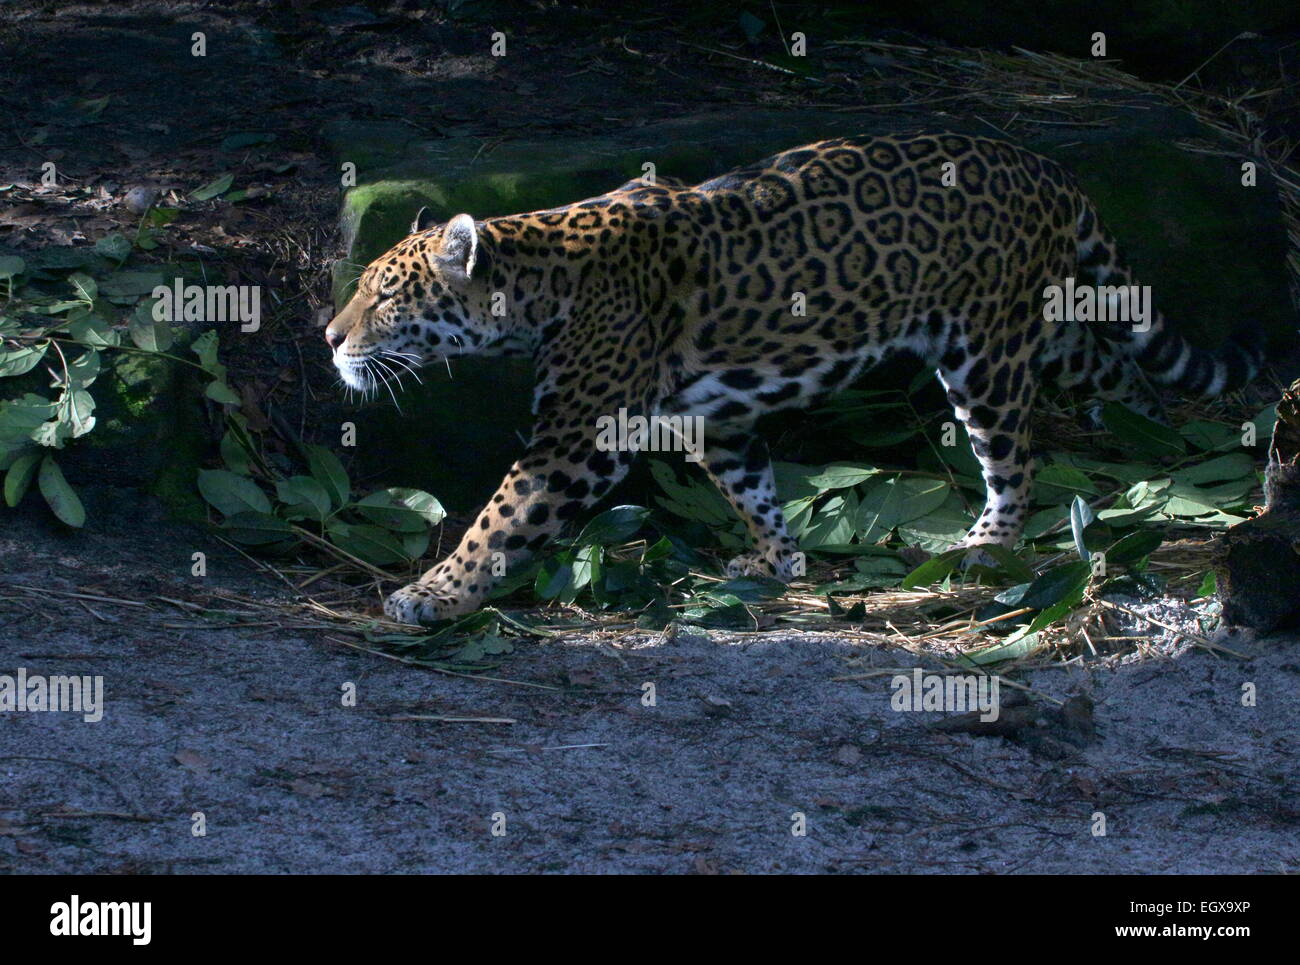 Female South American  Jaguar (Panthera onca) walking in a shady forest setting Stock Photo